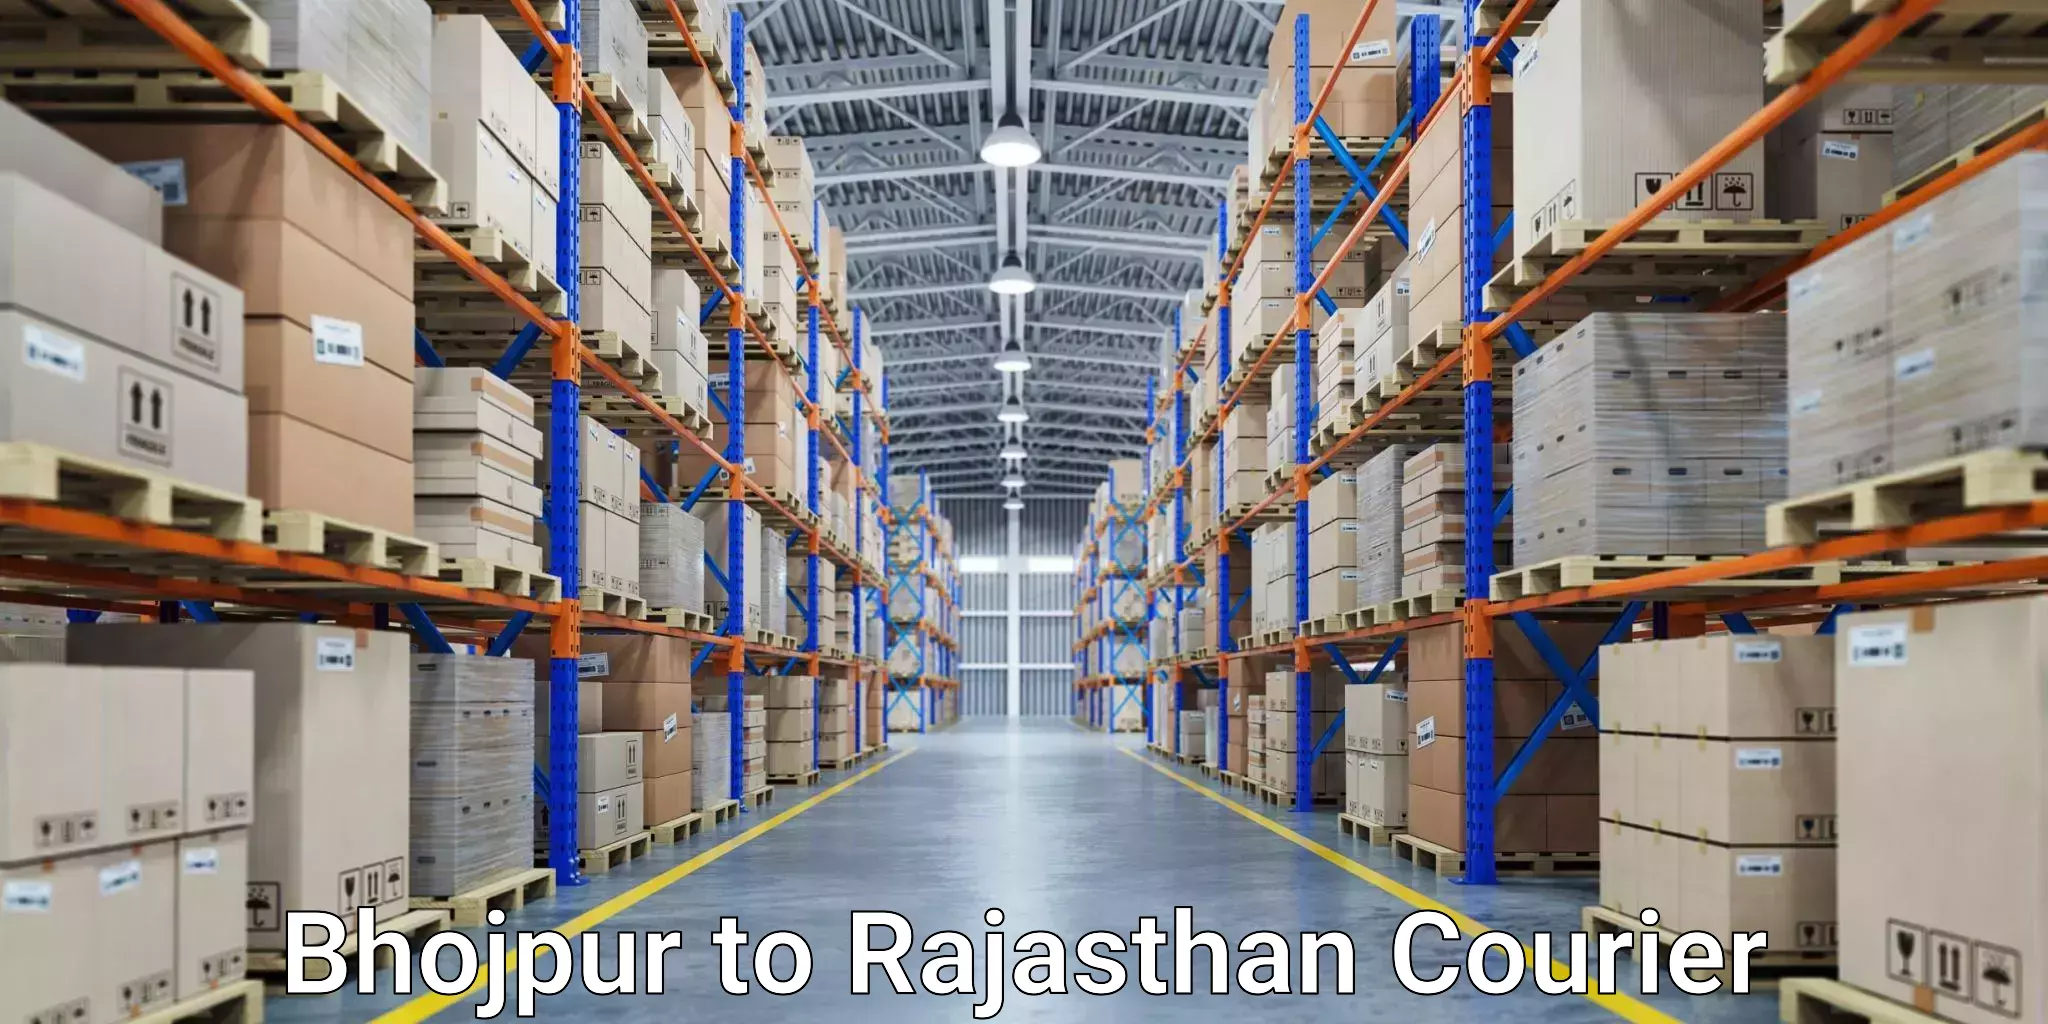 Courier service innovation Bhojpur to Rajasthan